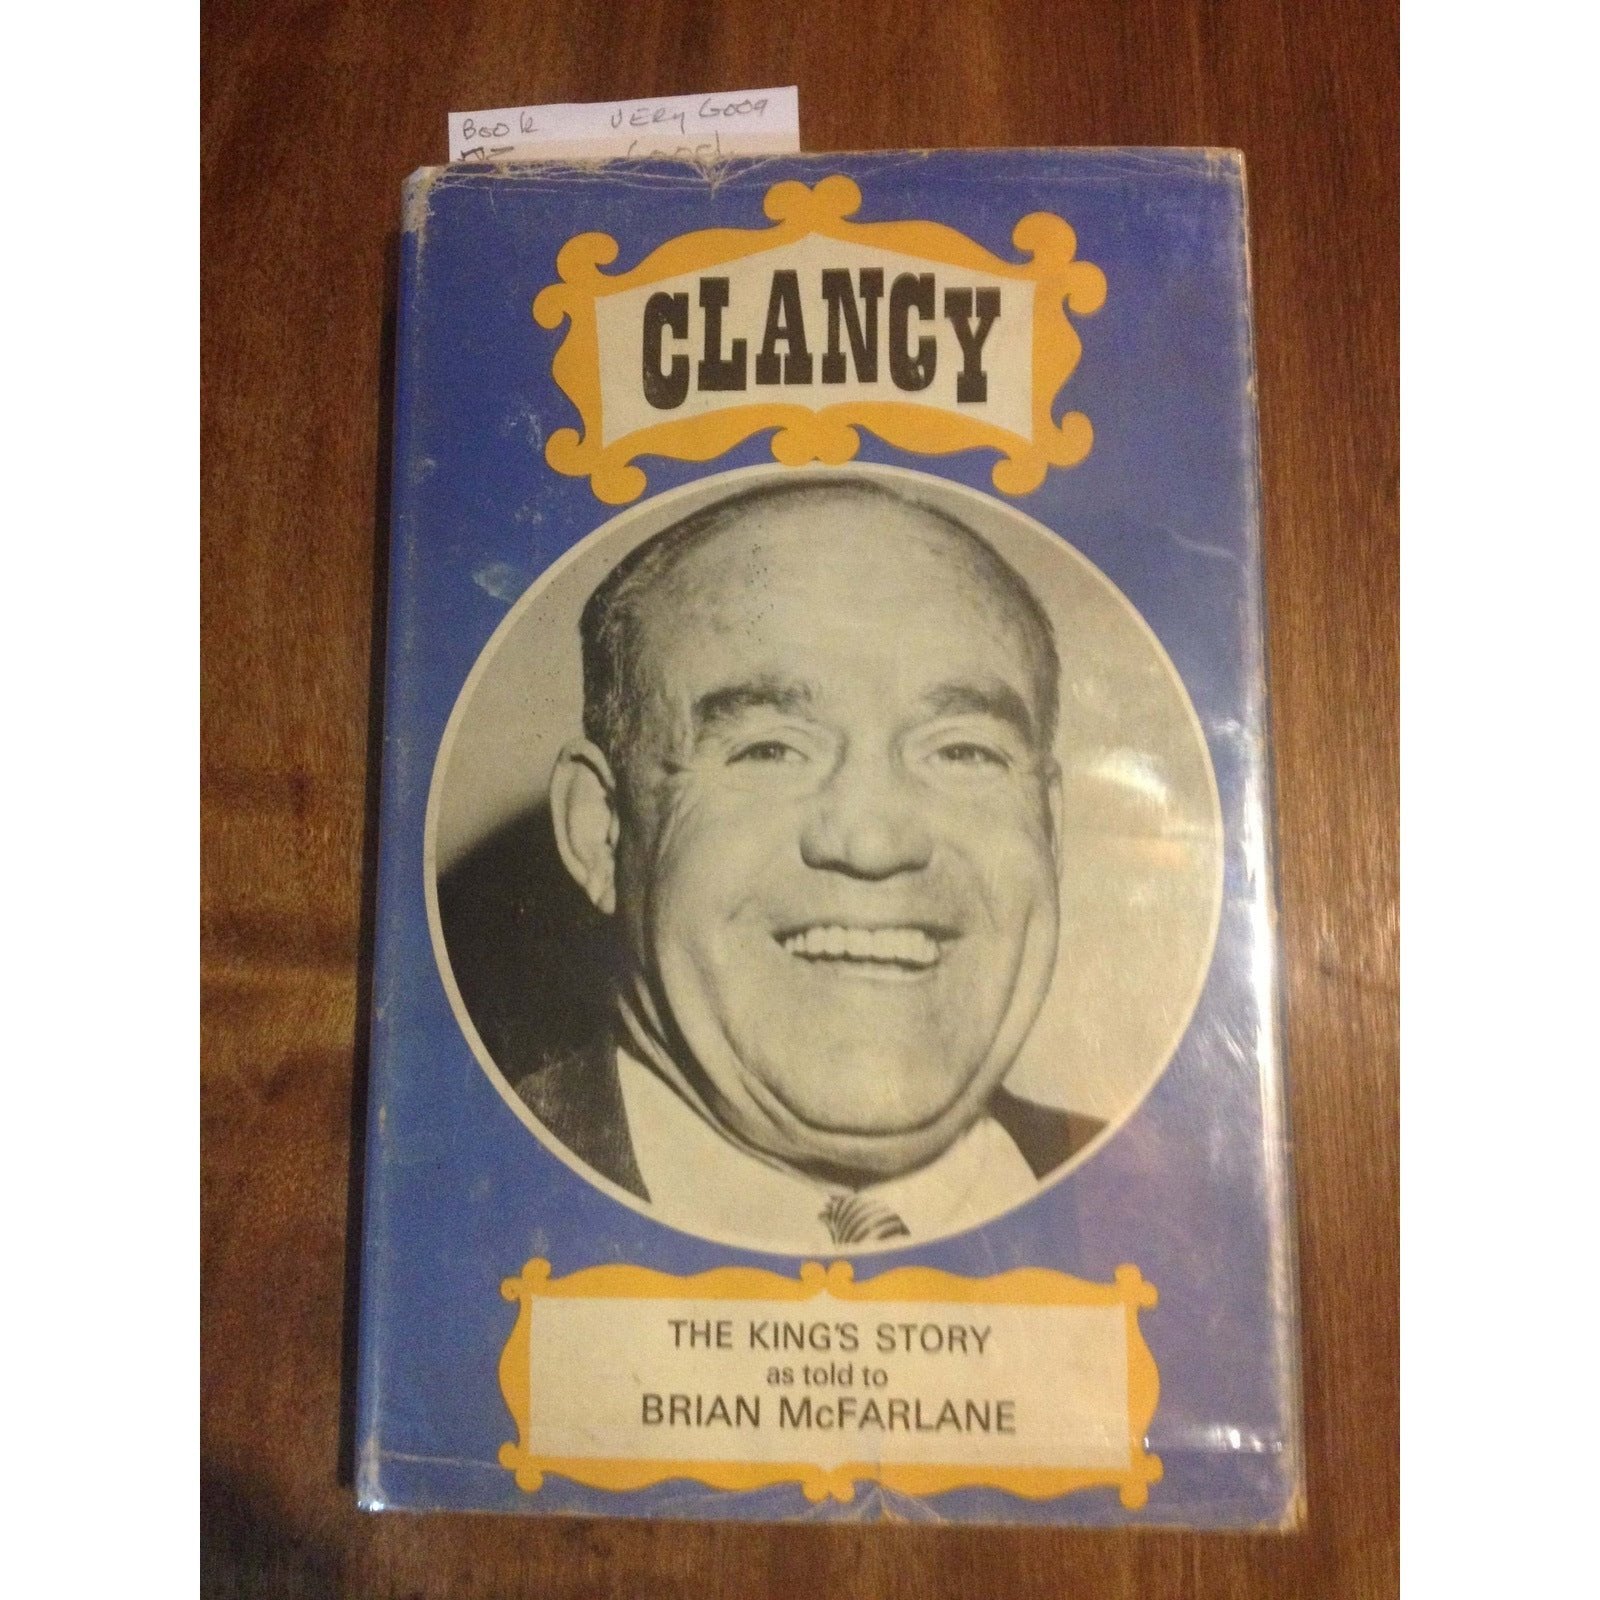 CLANCY, THE KINGS STORY  BY: BRIAN MCFARLANE BooksCardsNBikes